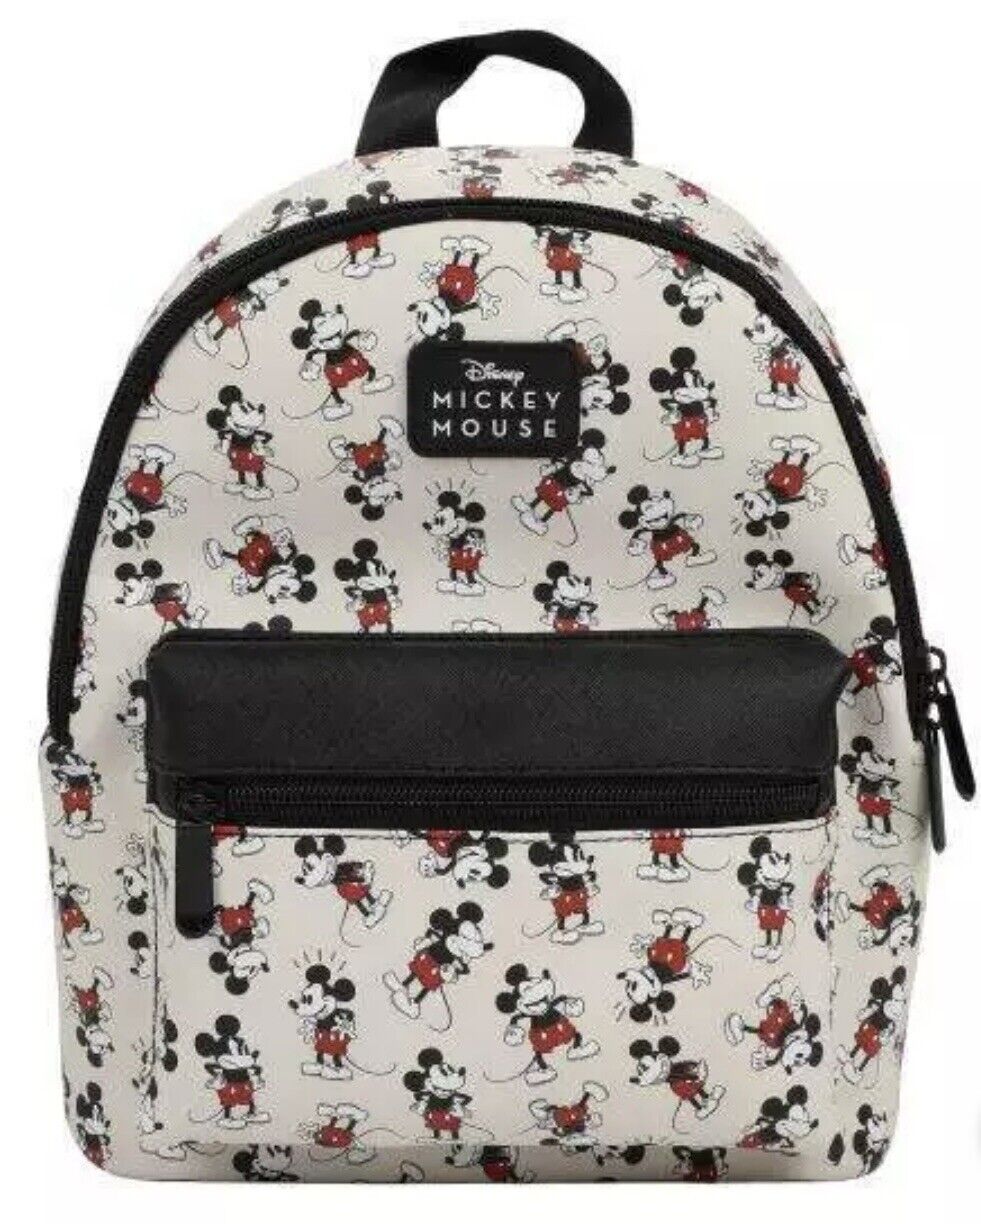 NEW Bioworld Disney Mini Backpack. Minnie And Mickey Mouse. Black And White.